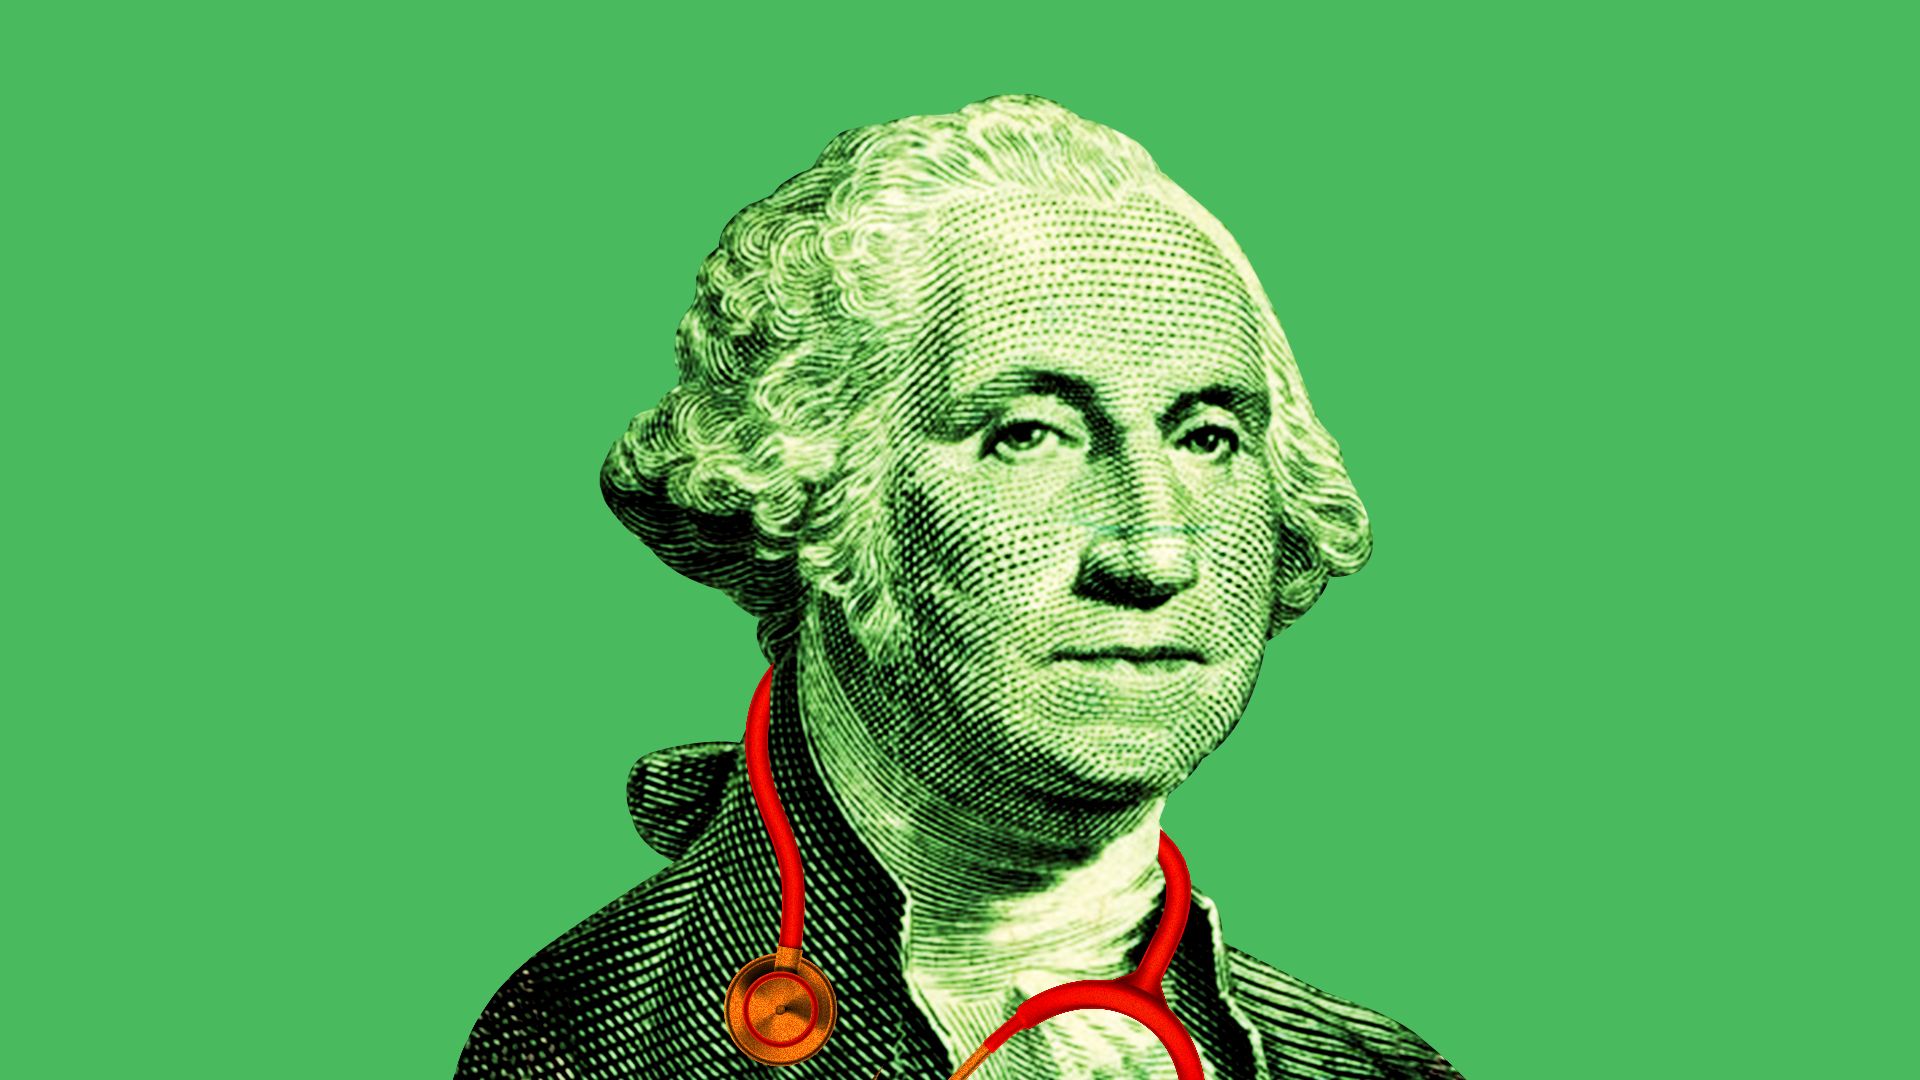 Illustration of George Washington, from the dollar bill, wearing a stethoscope 